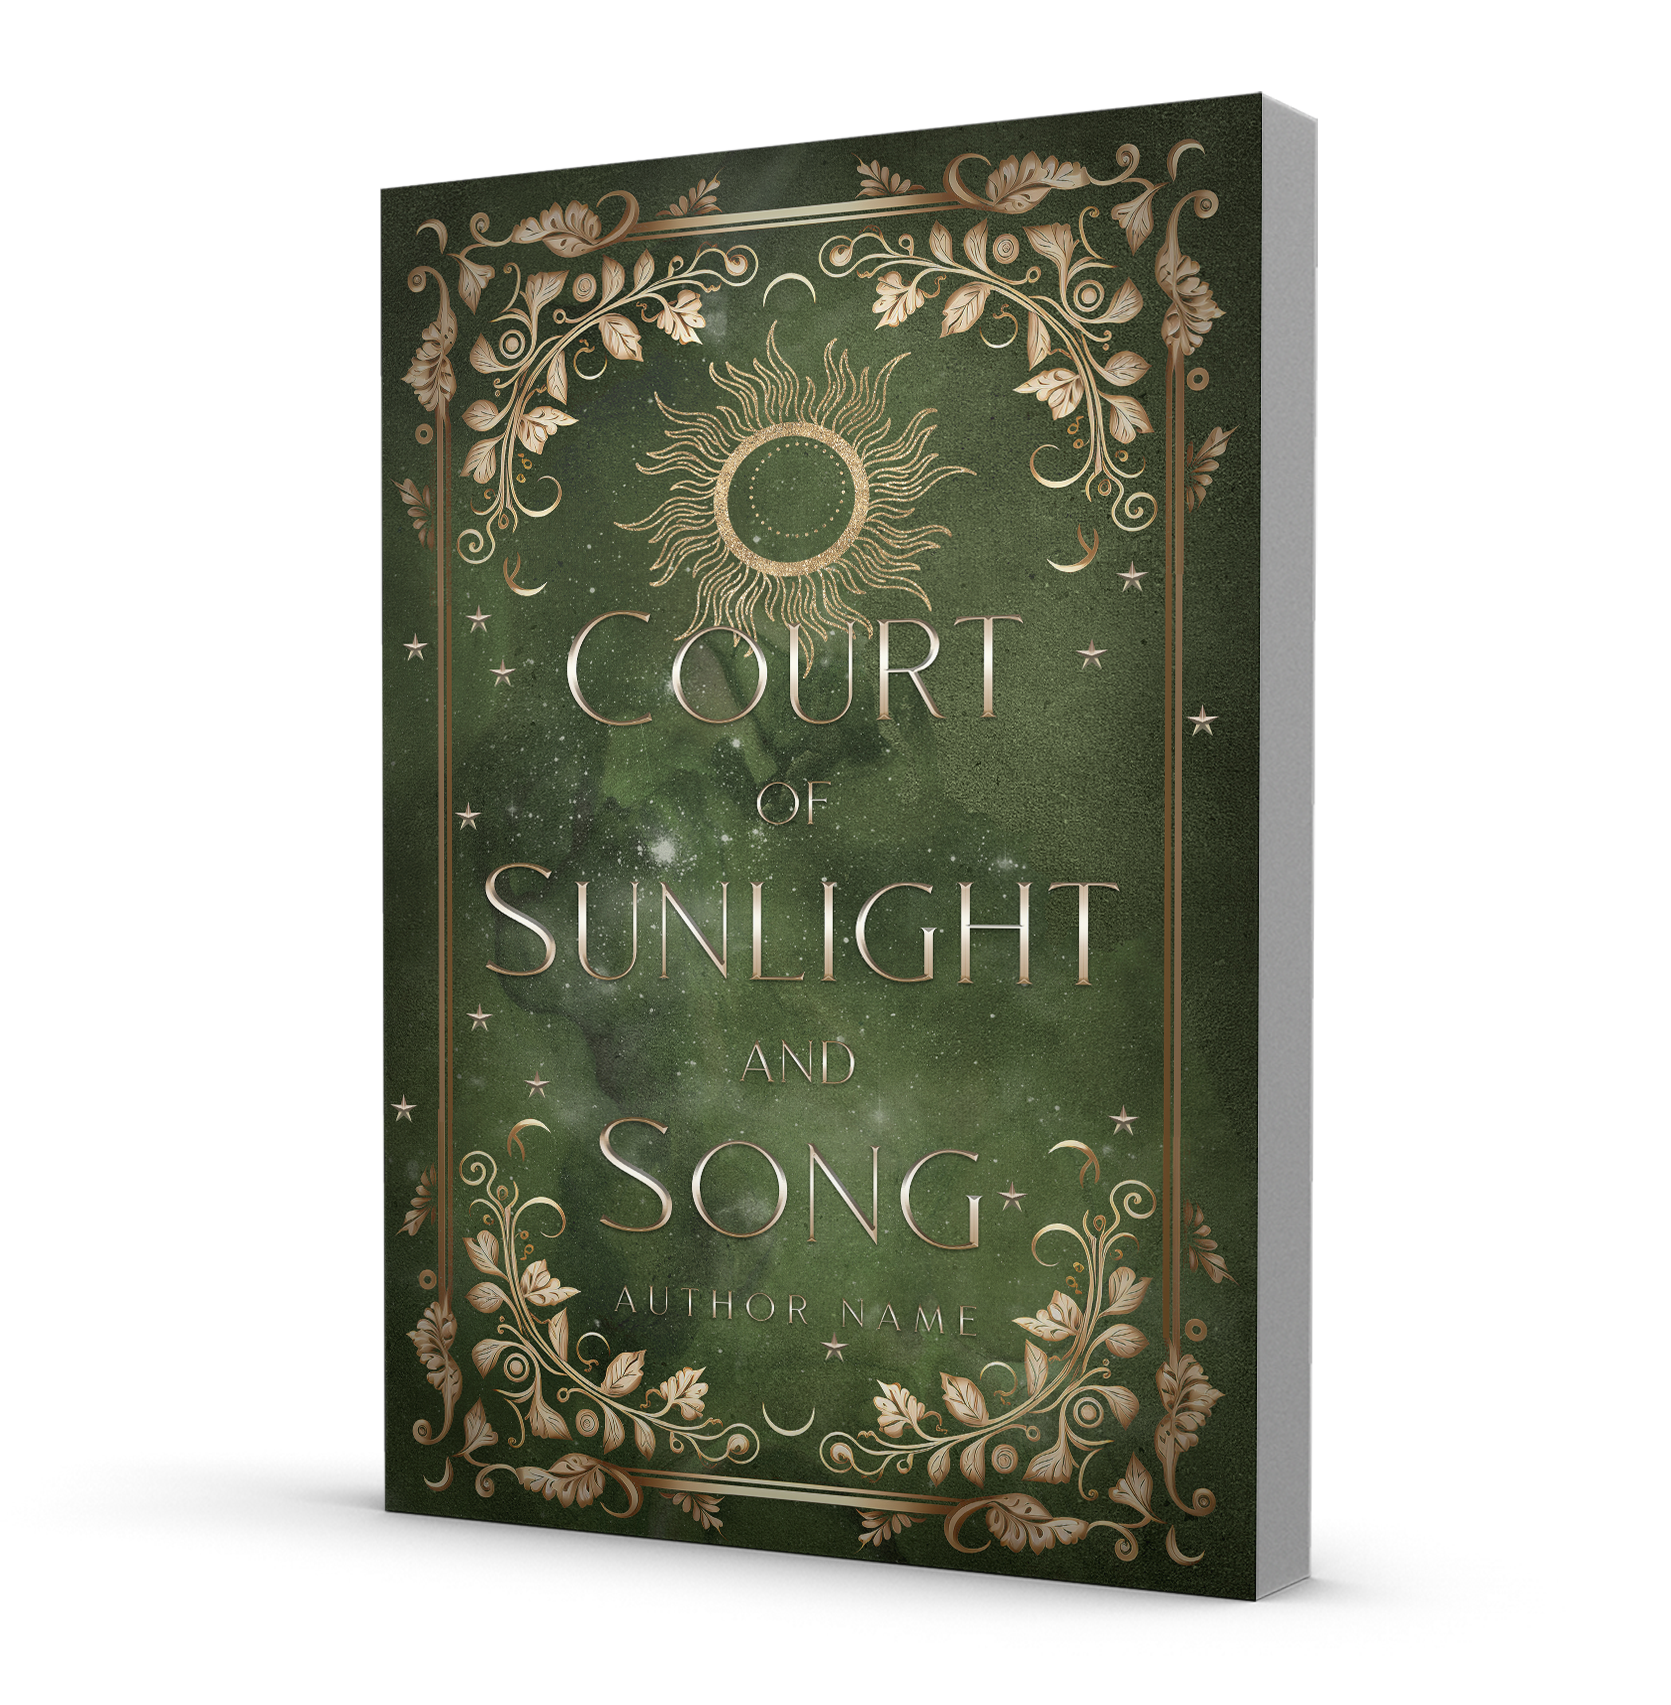 A green and gold fantasy book cover design with a vine border and a golden sun motif.